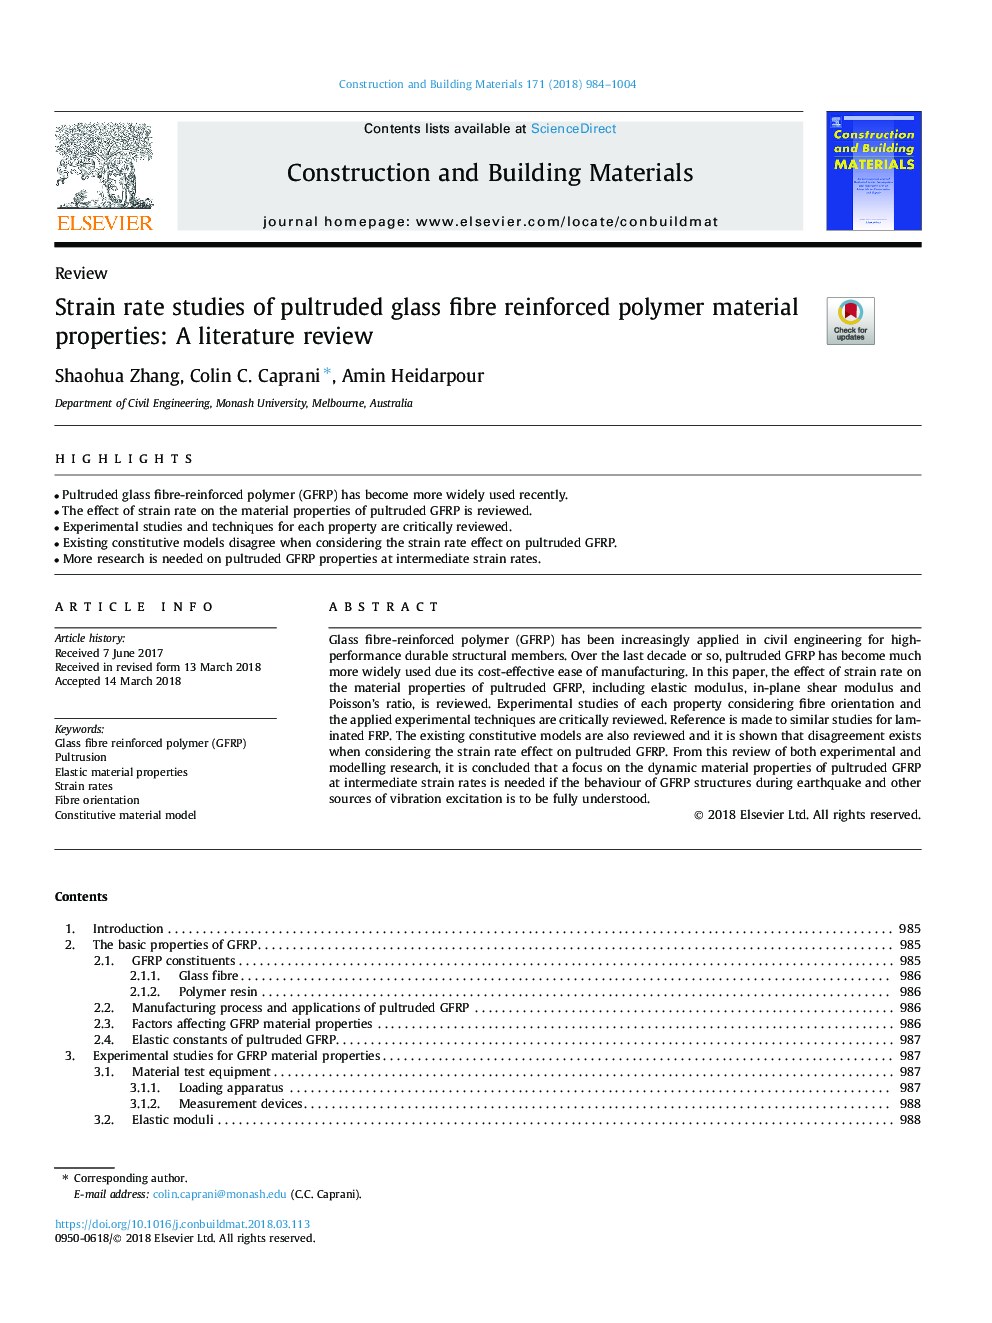 Strain rate studies of pultruded glass fibre reinforced polymer material properties: A literature review